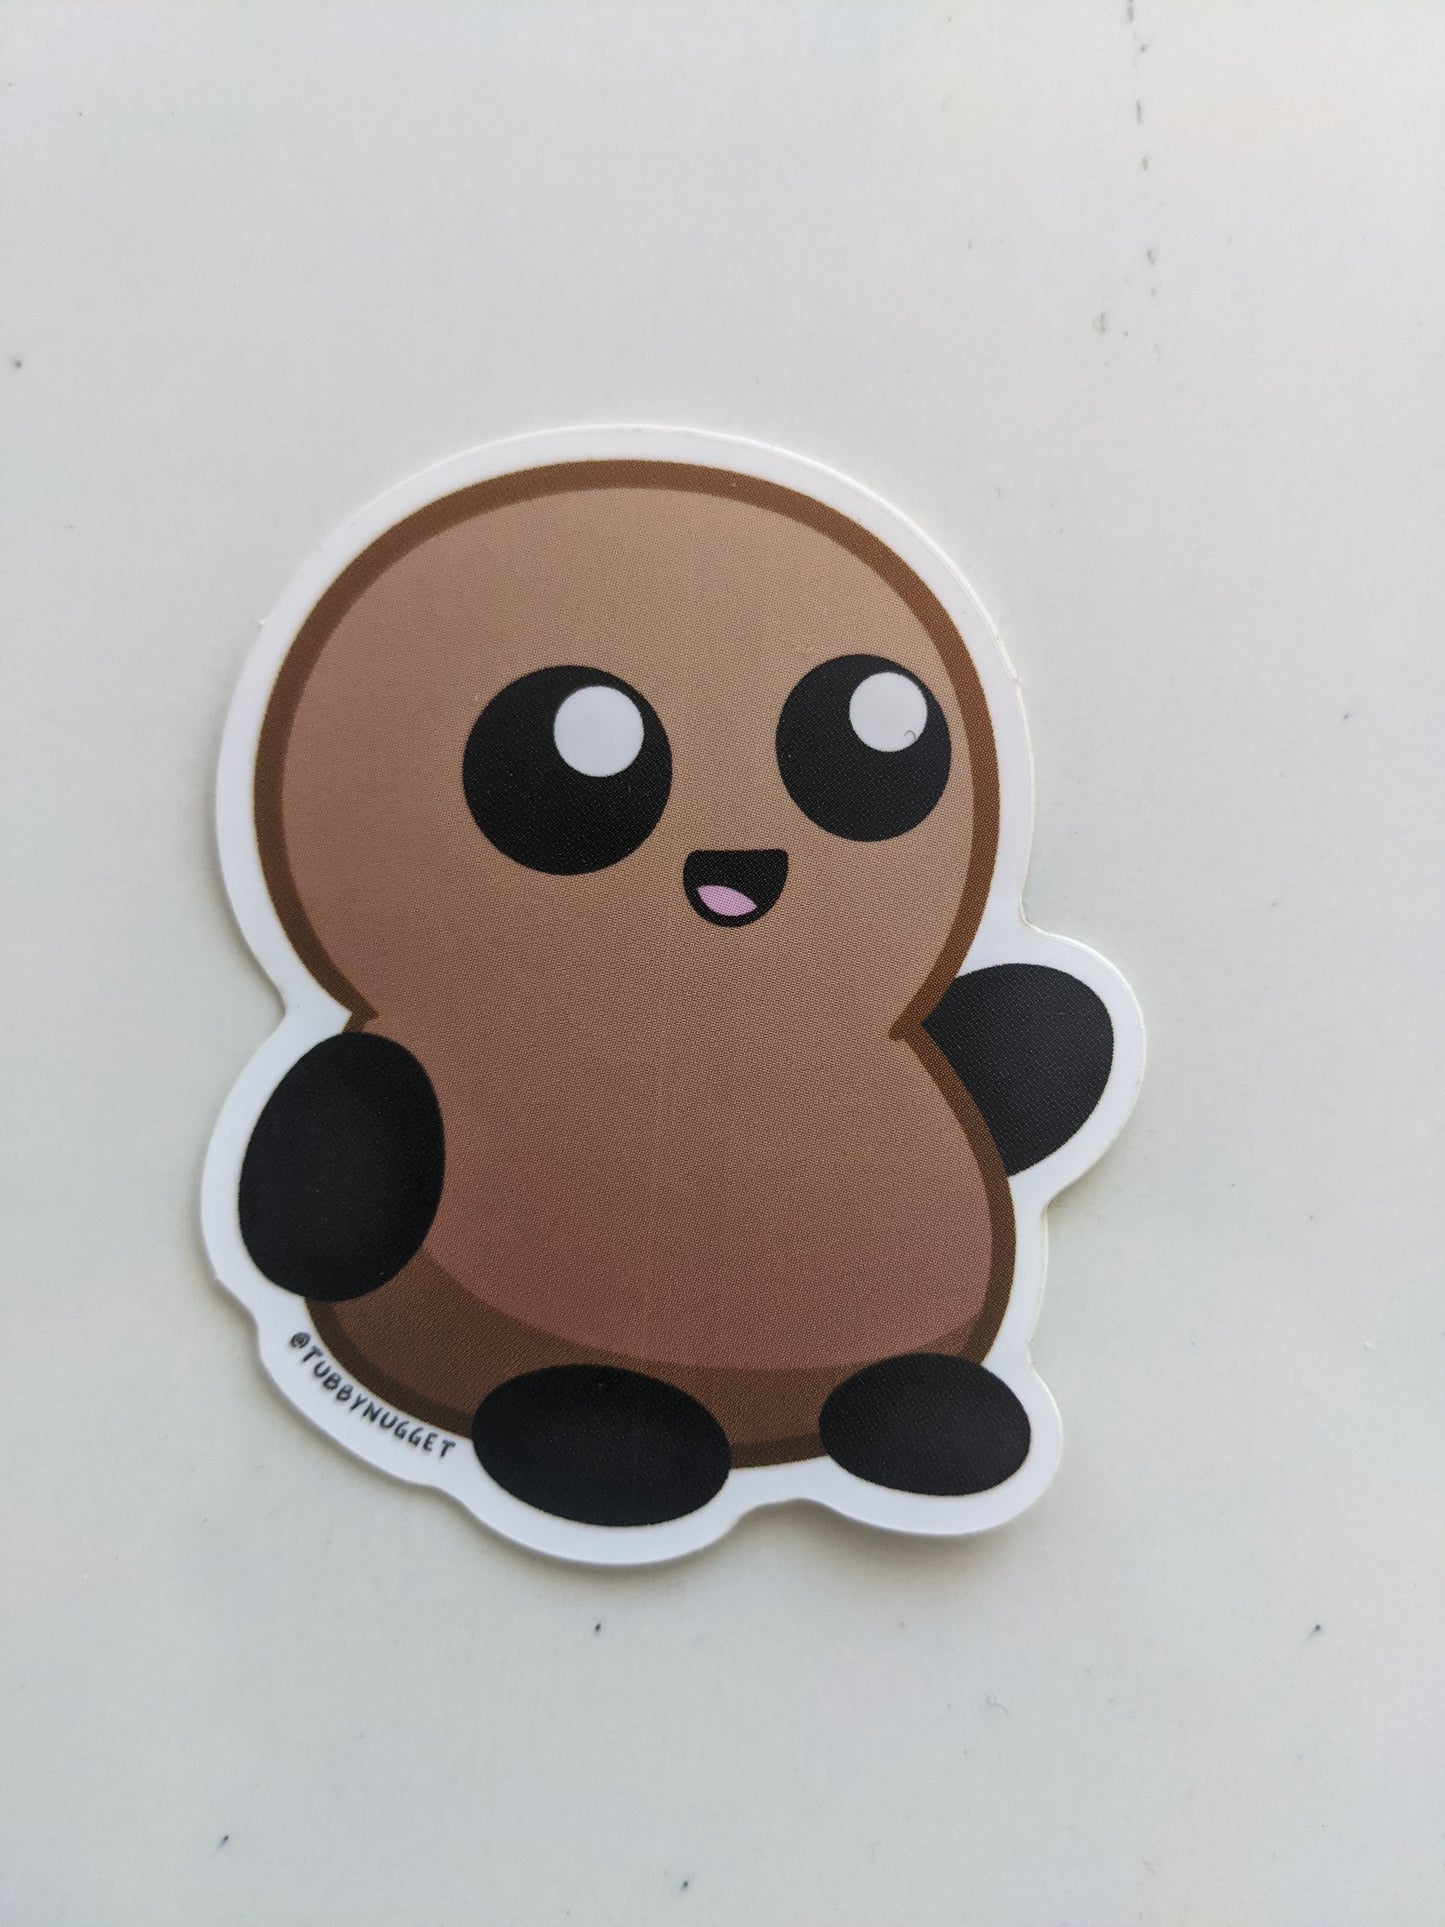 Tubby Nugget "Chilling" Sticker